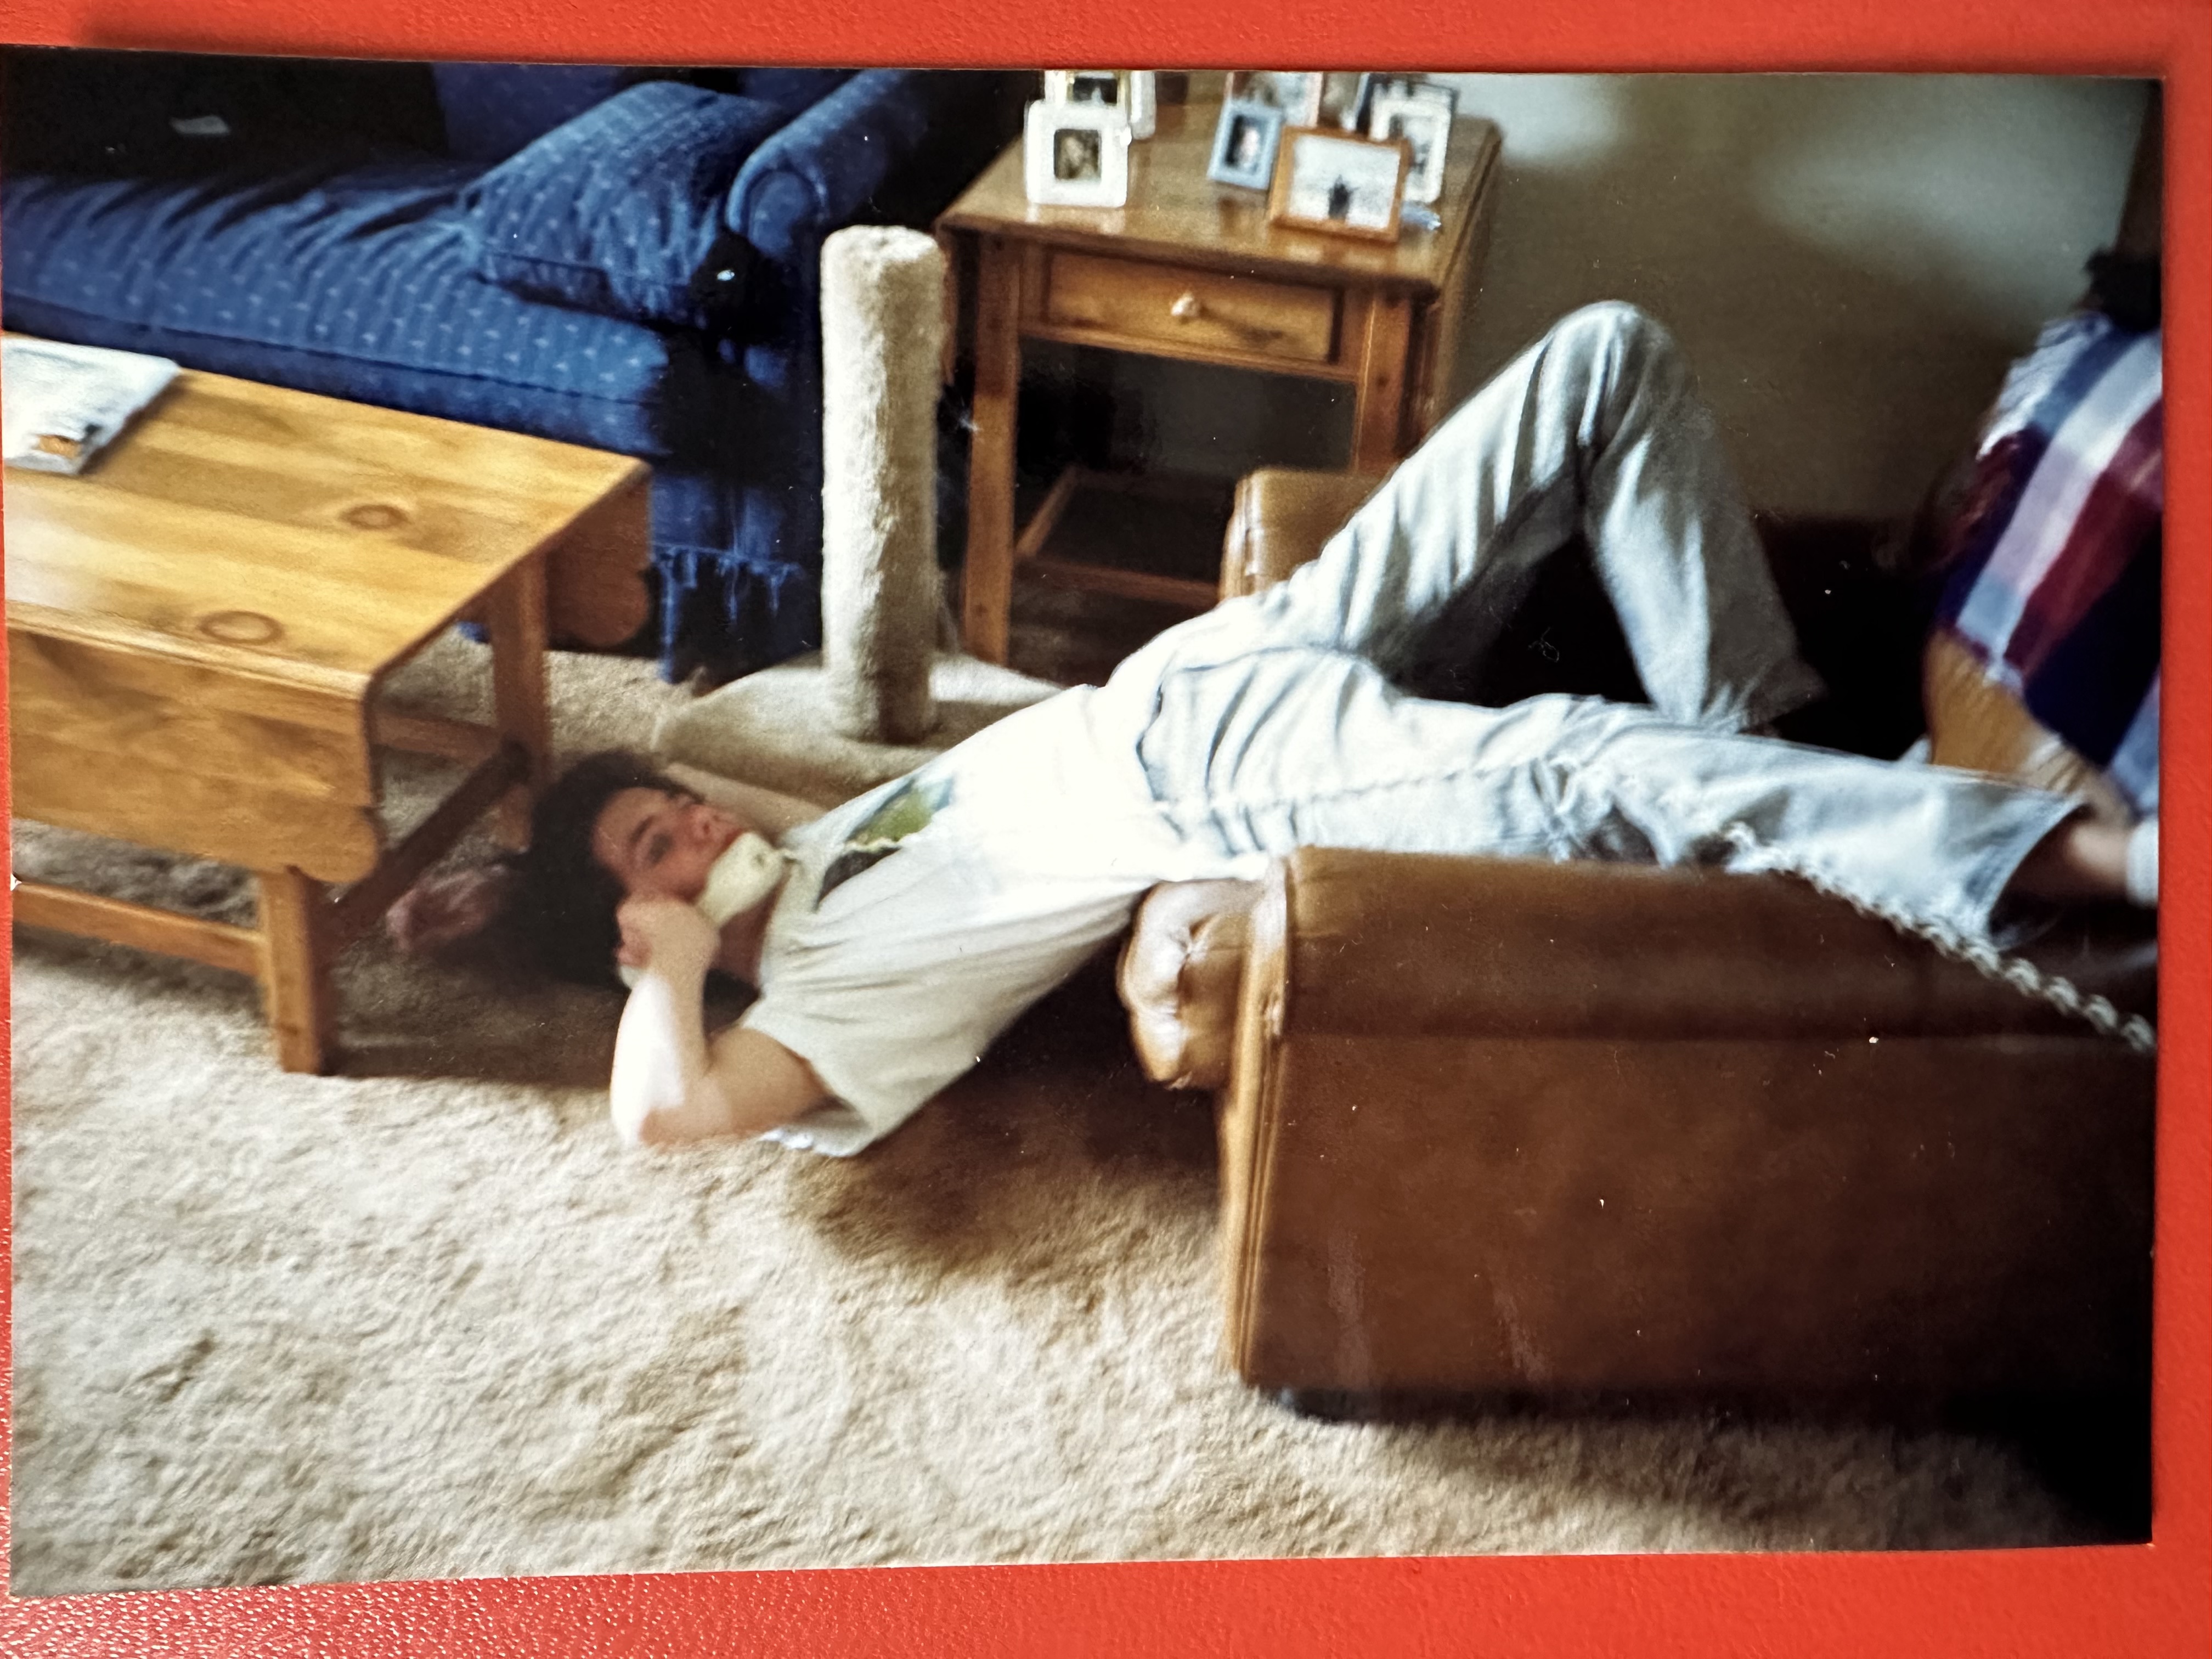 A teenager lays upside down in an armchair, his head and shoulders on the carpet. He is holding a phone receiver to his ear and the cord stretches along his body and out of frame. 